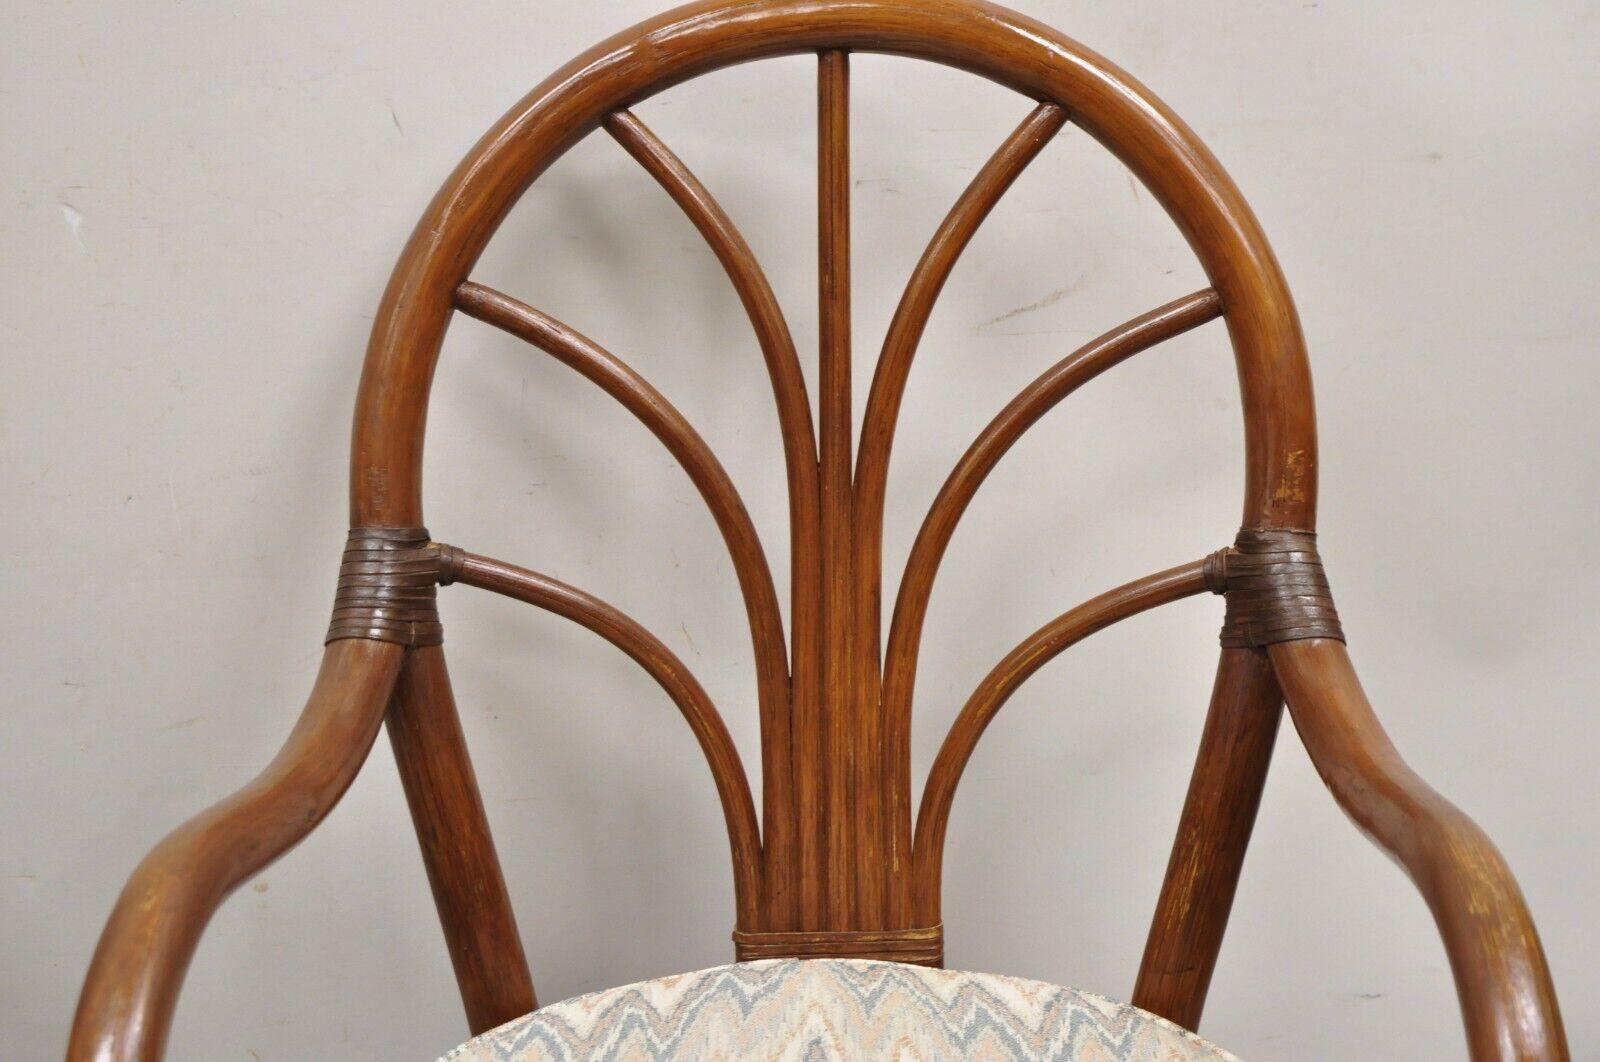 20th Century Vintage Bentwood Rattan Hollywood Regency Fan Back Dining Chairs - Set of 4 For Sale